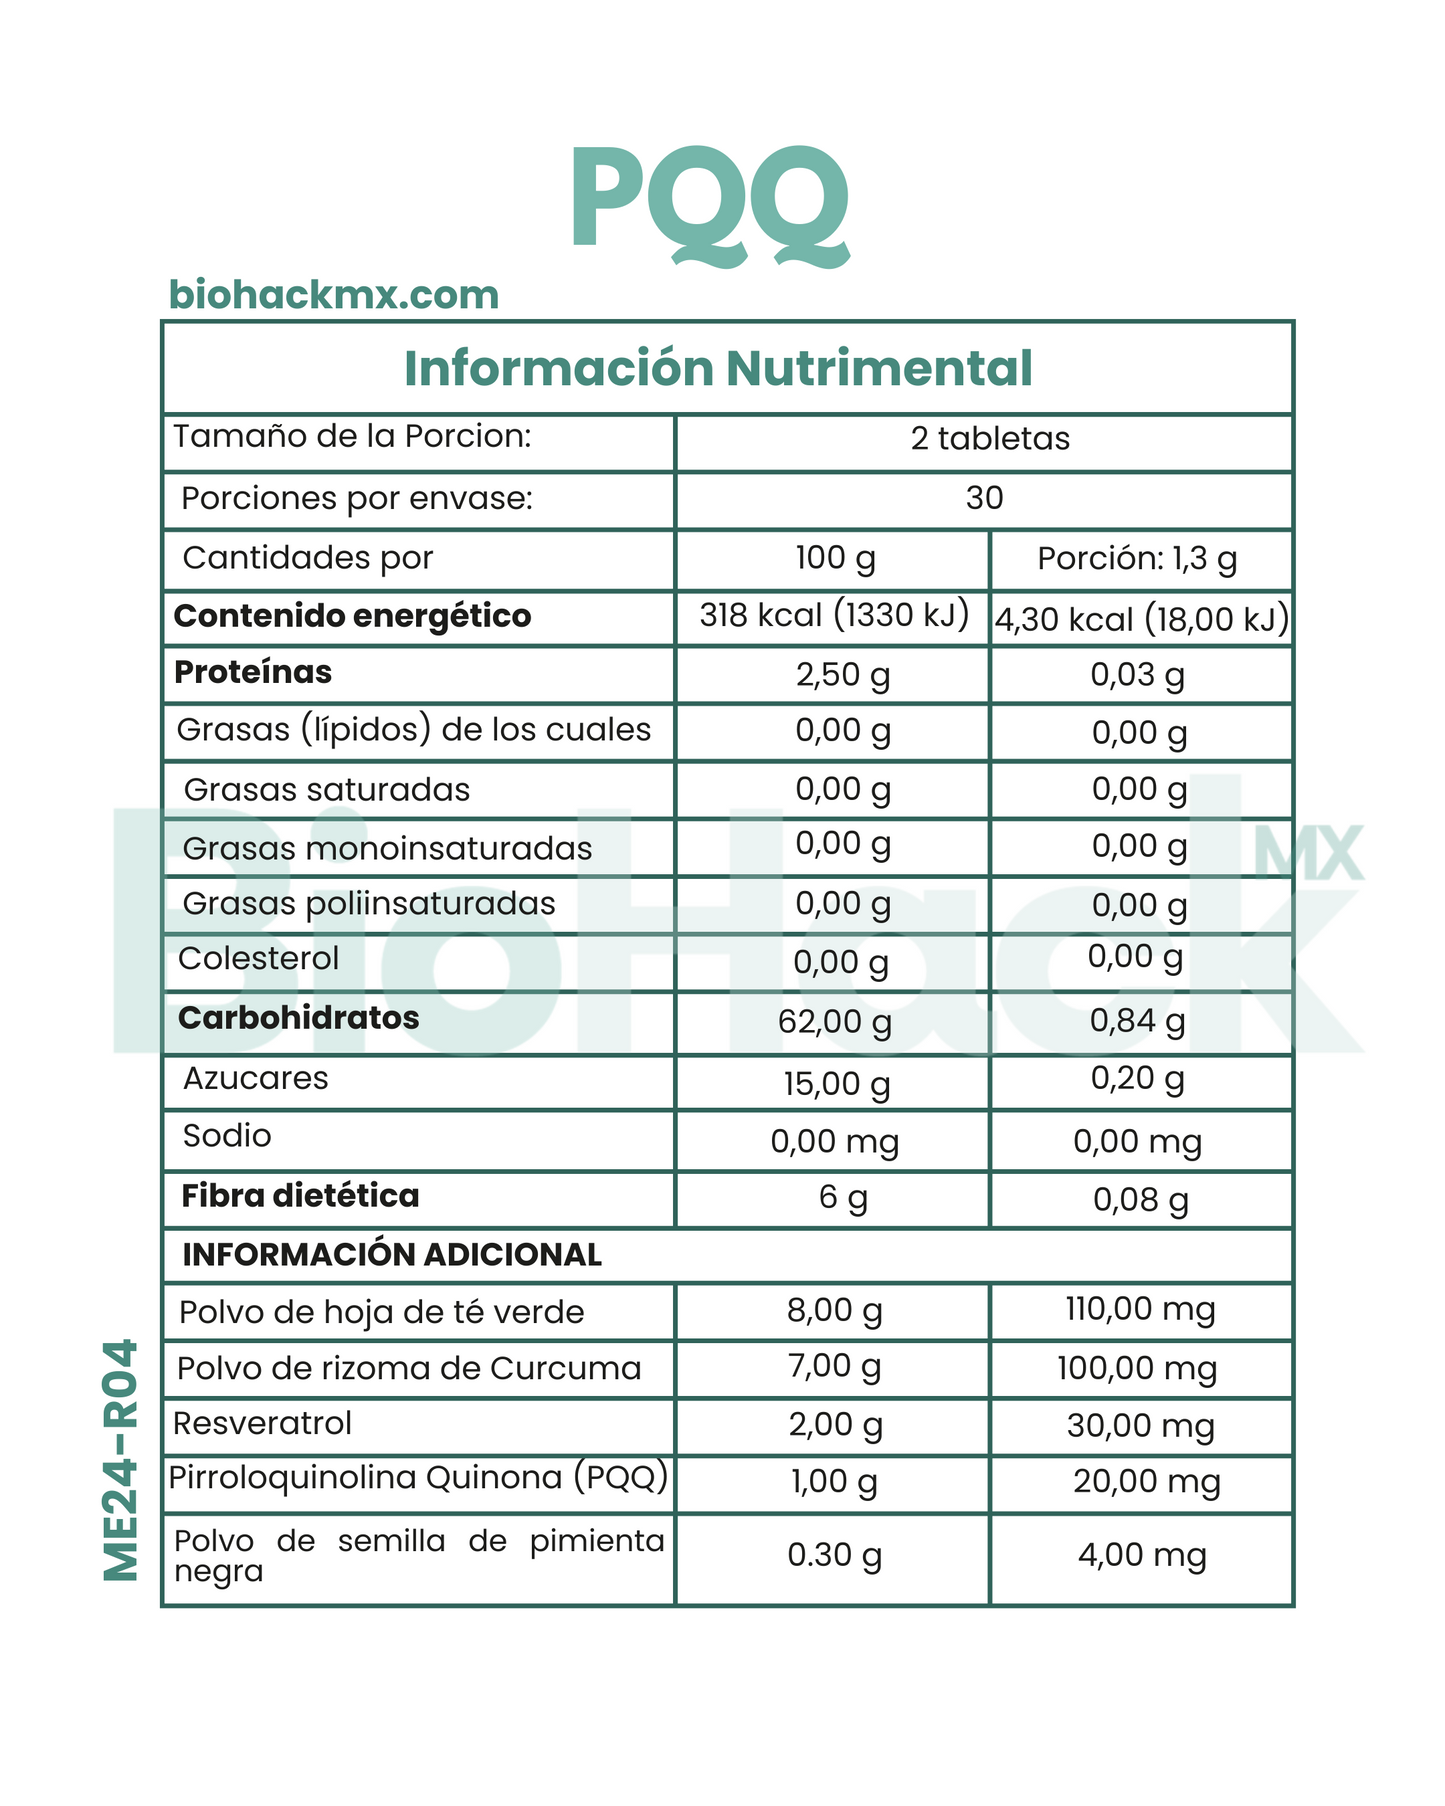 Combo Booster Metabolismo